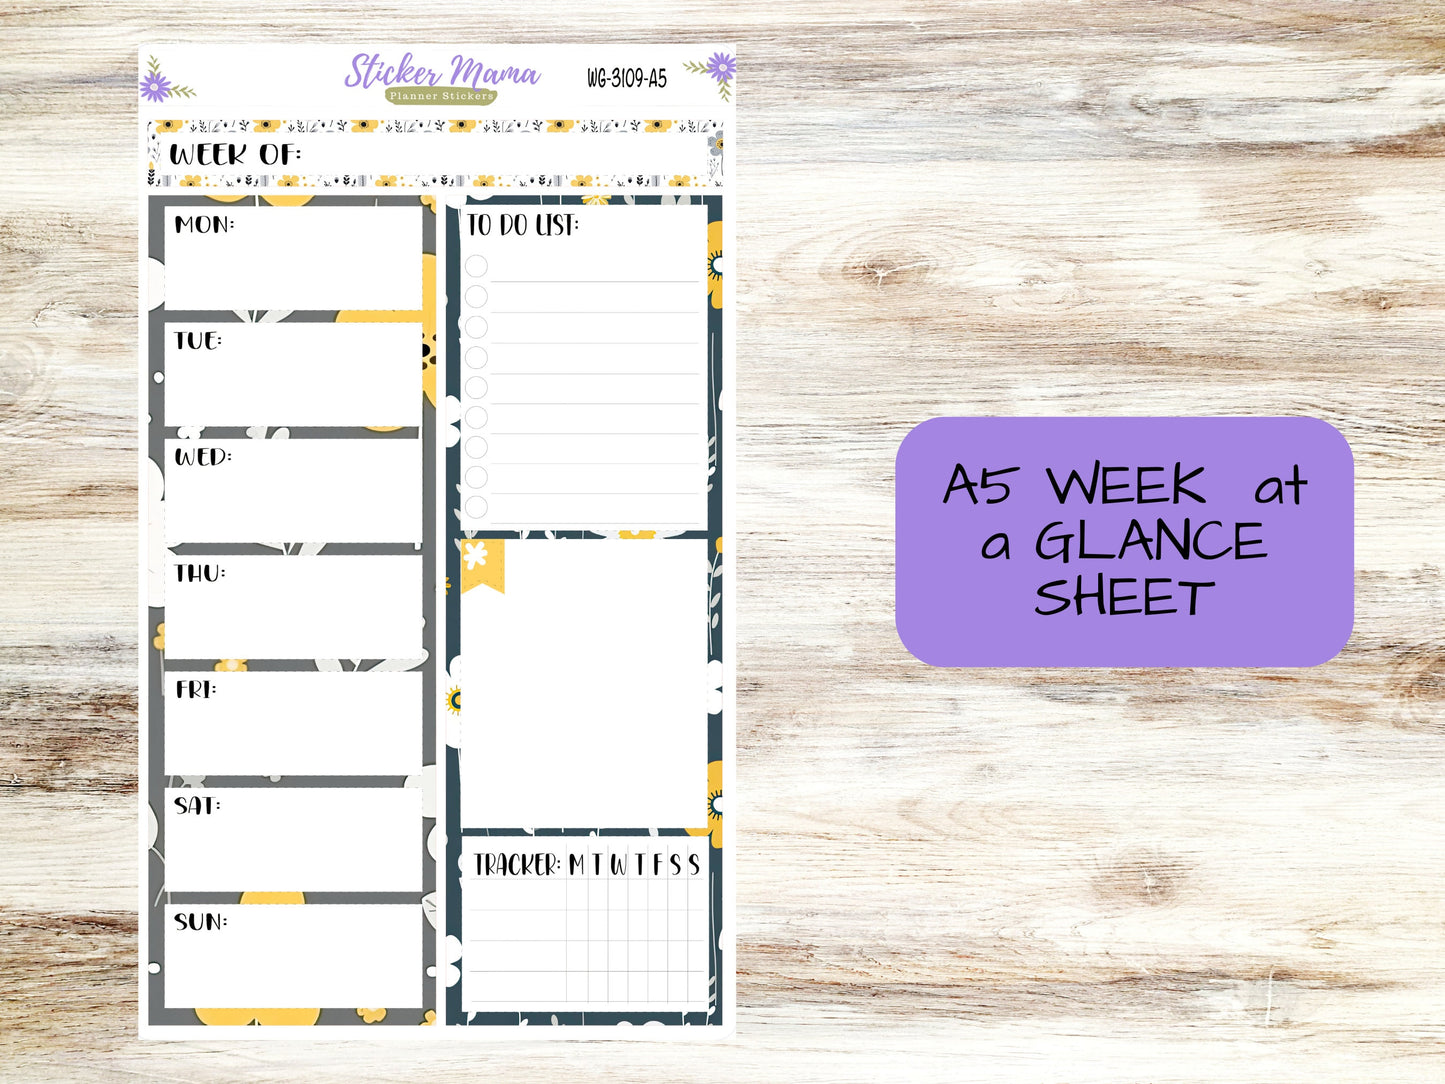 WEEK at a GLANCE-Kit #3109 || Grey and Yellow Floral  || Week at a Glance - weekly glance 7x9 or a5